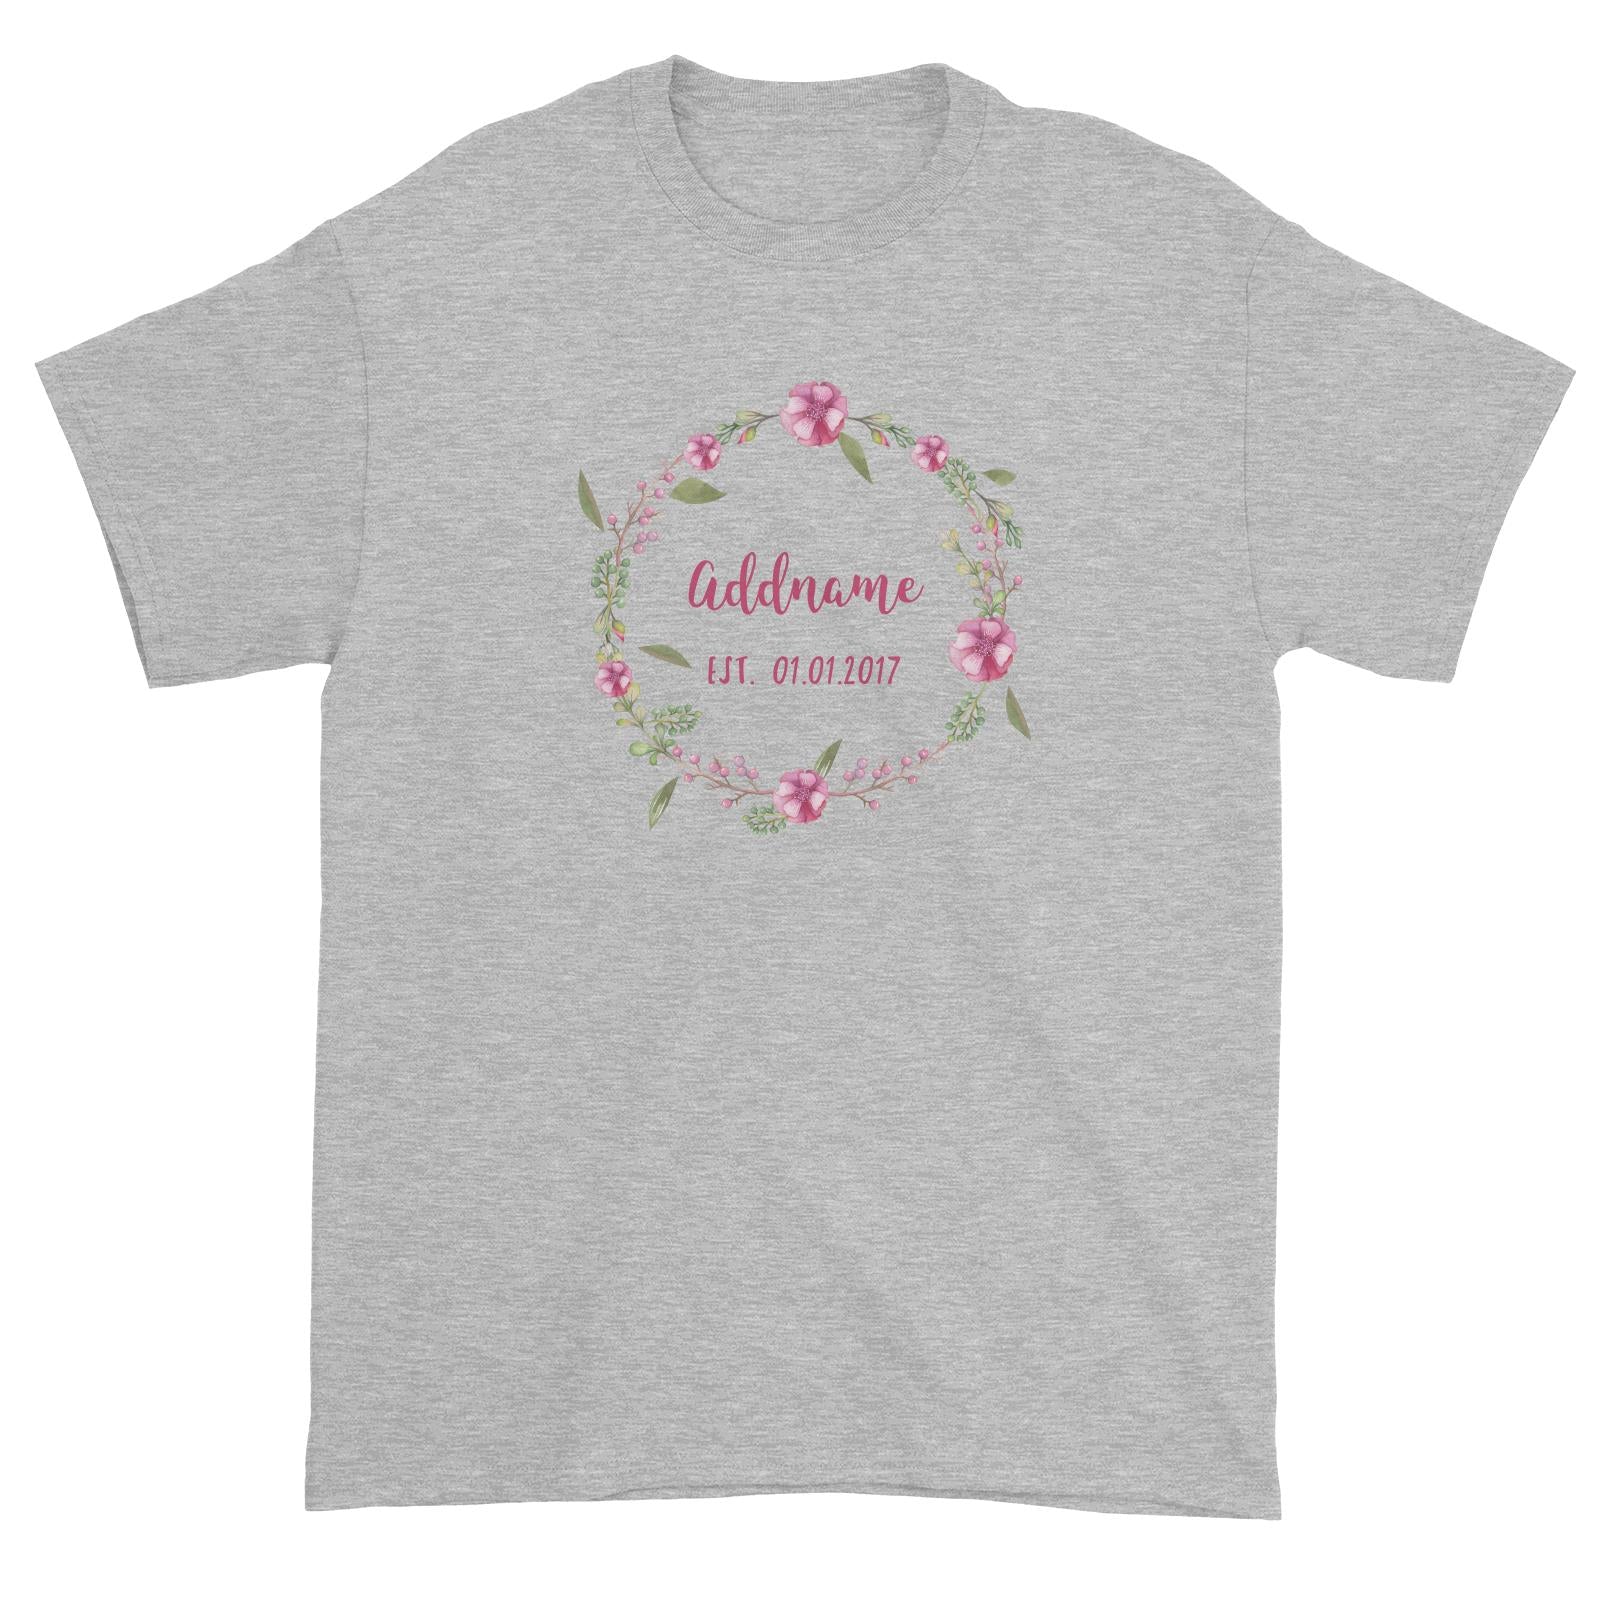 Add Name and Add Date in Pink Flower Wreath Unisex T-Shirt